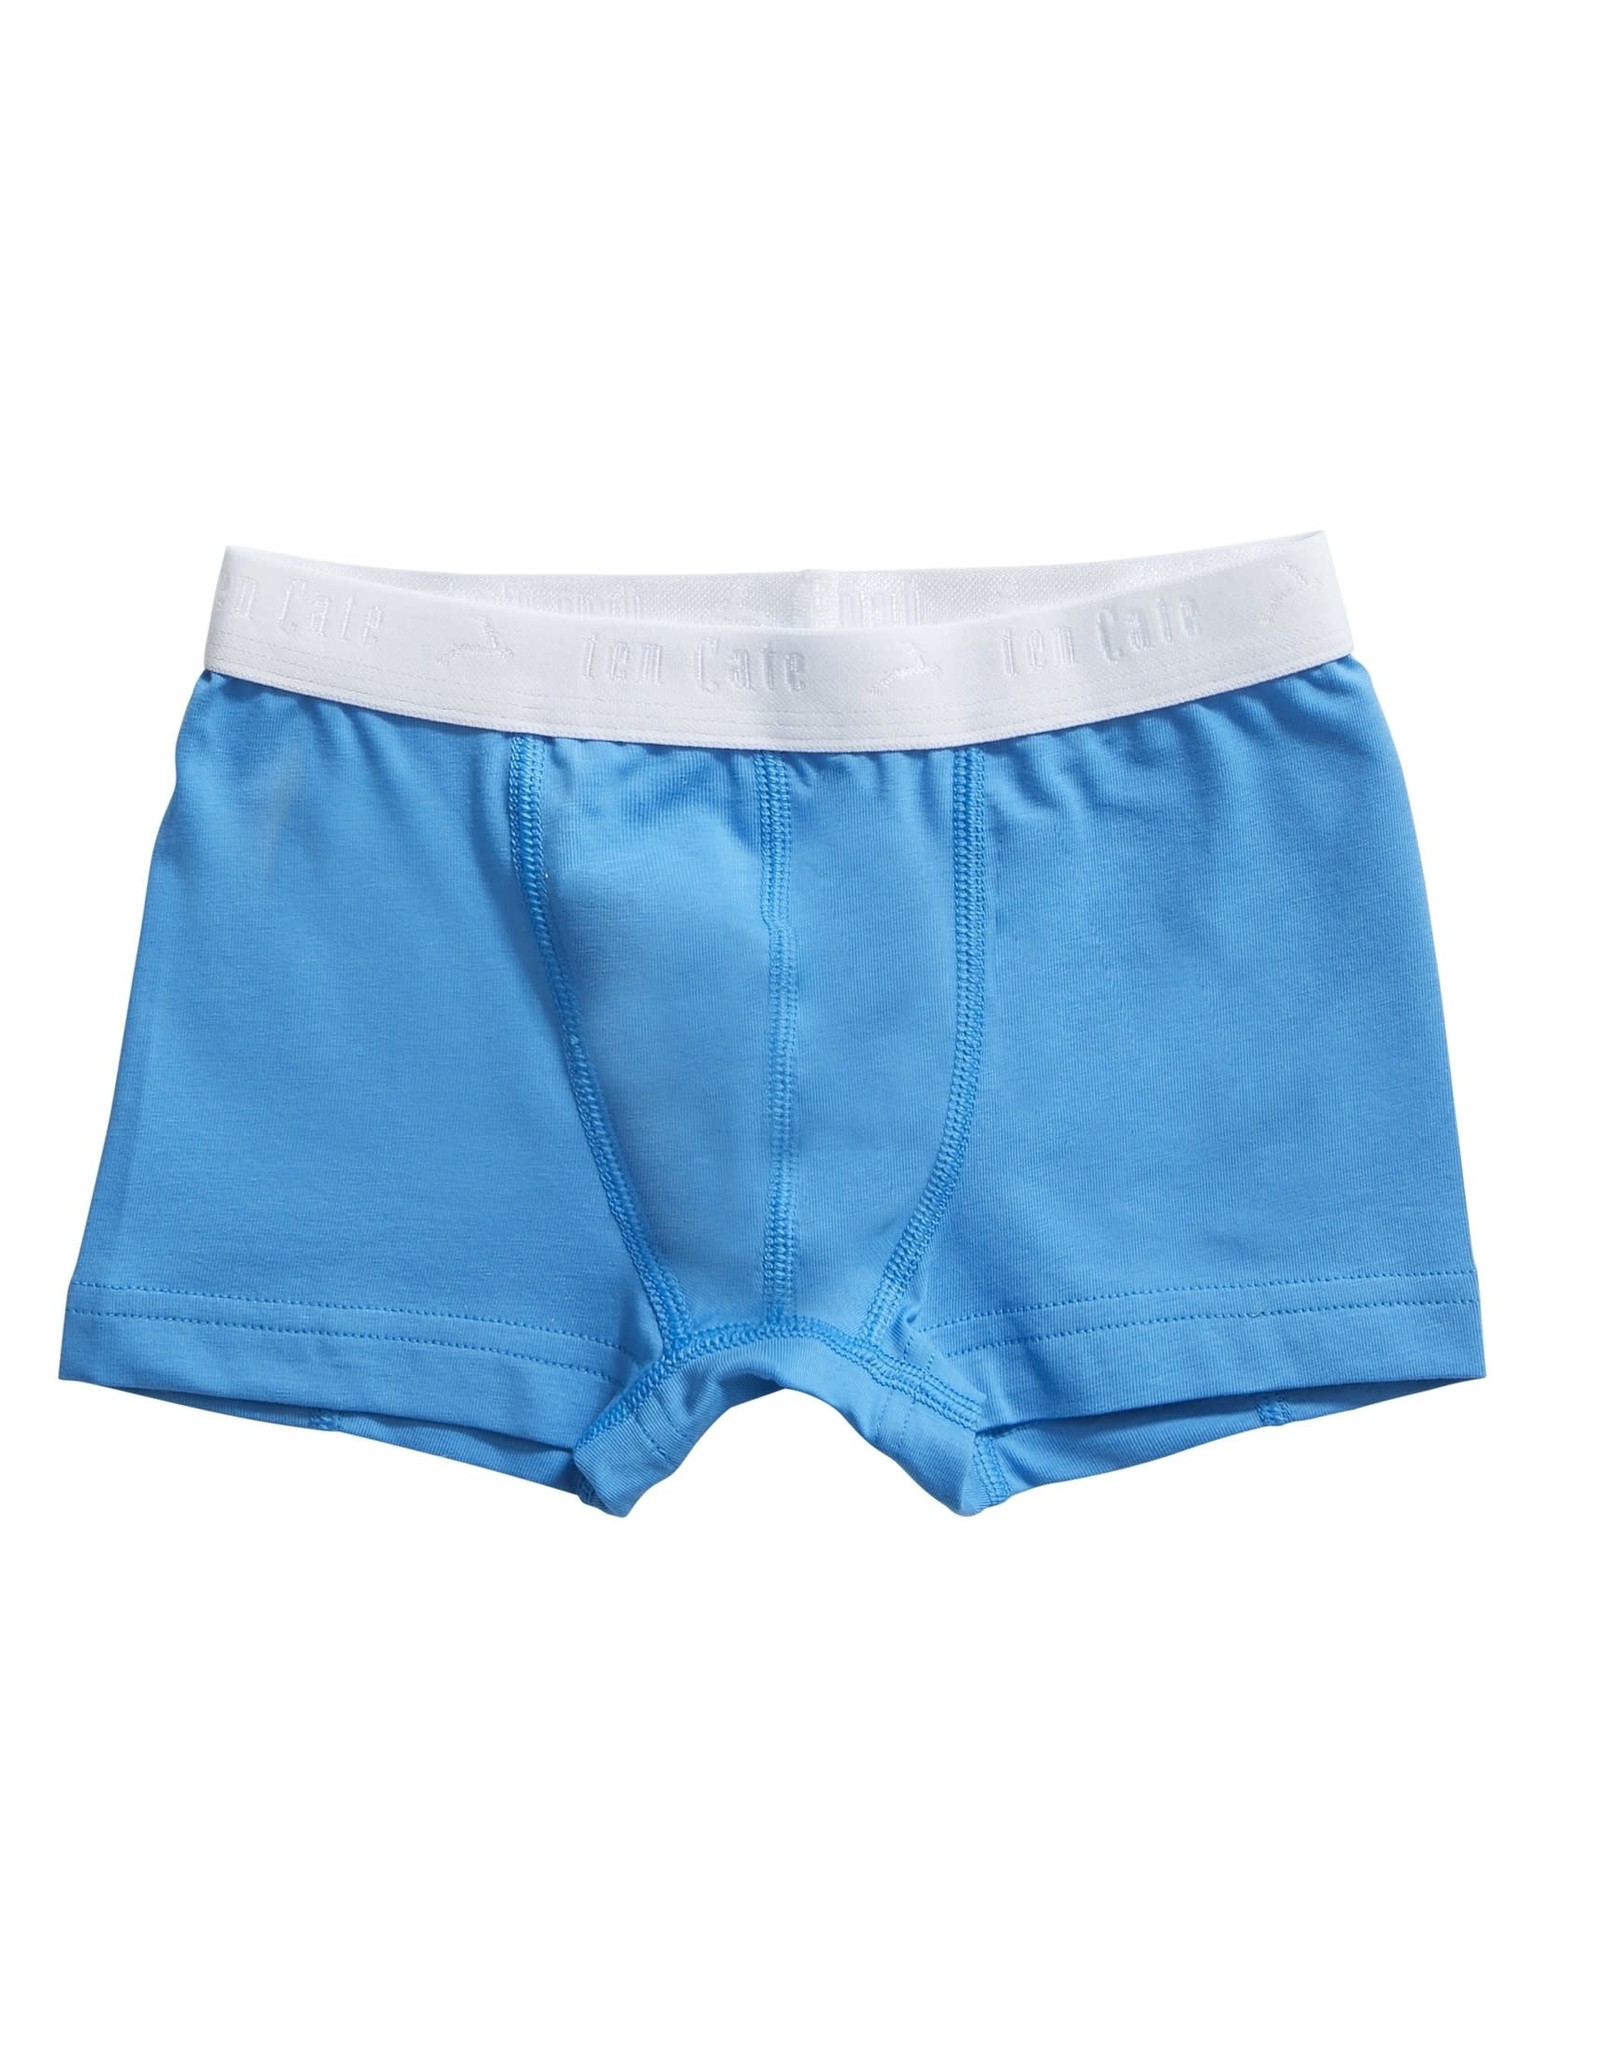 Ten Cate Basis boys shorts 2 pack stripe and diva